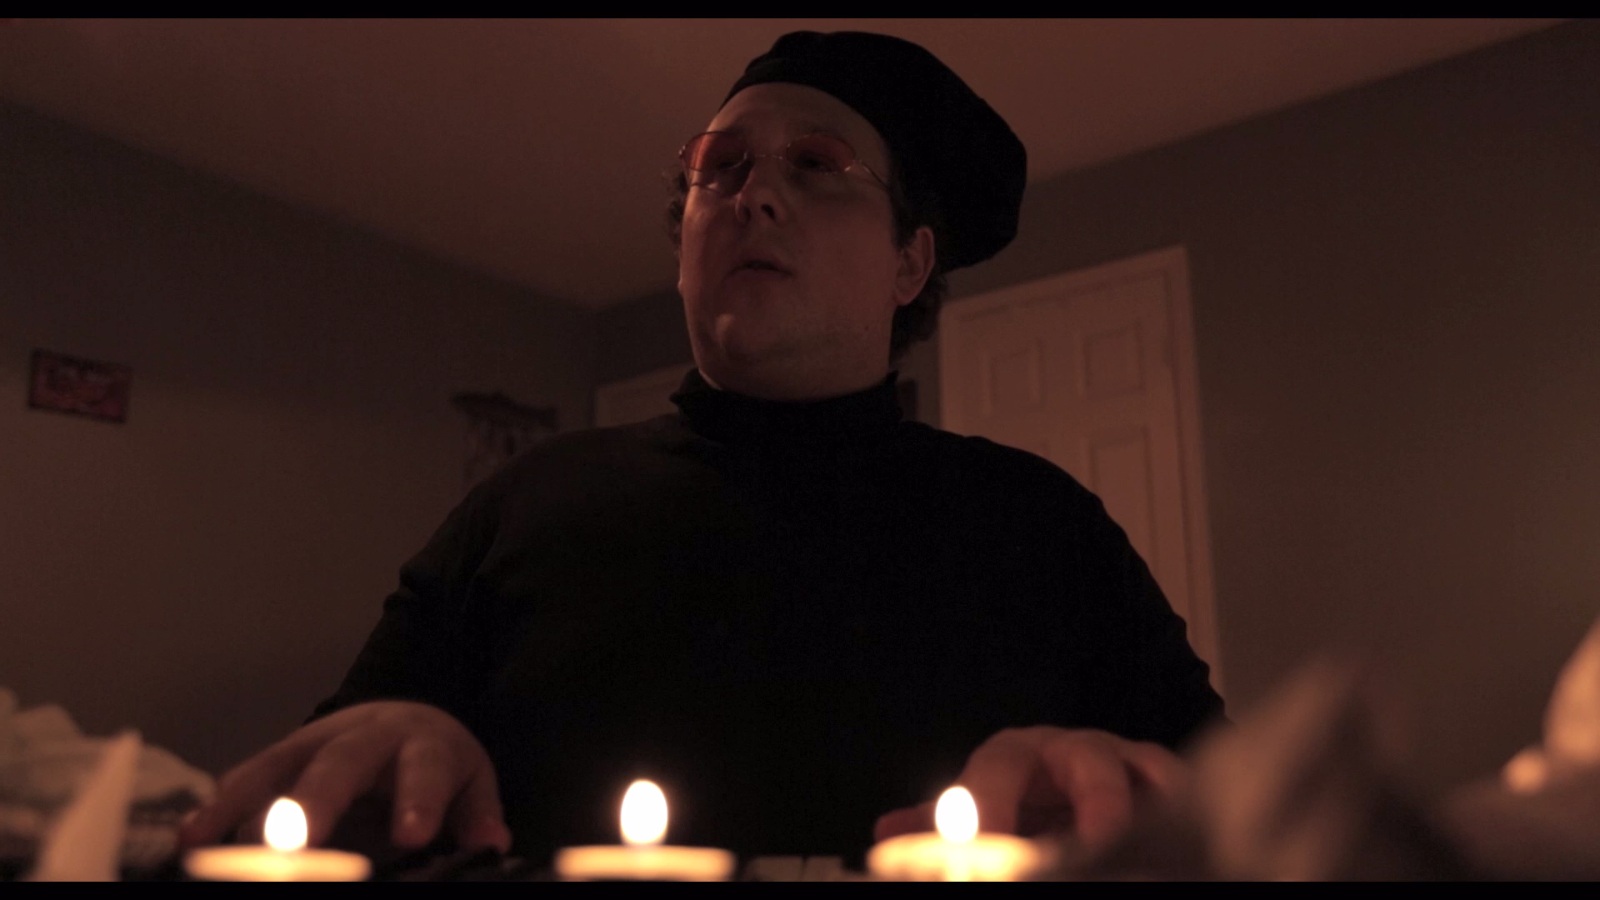 Still shot from the short film 'Being Frank' directed by Mike Bailey.